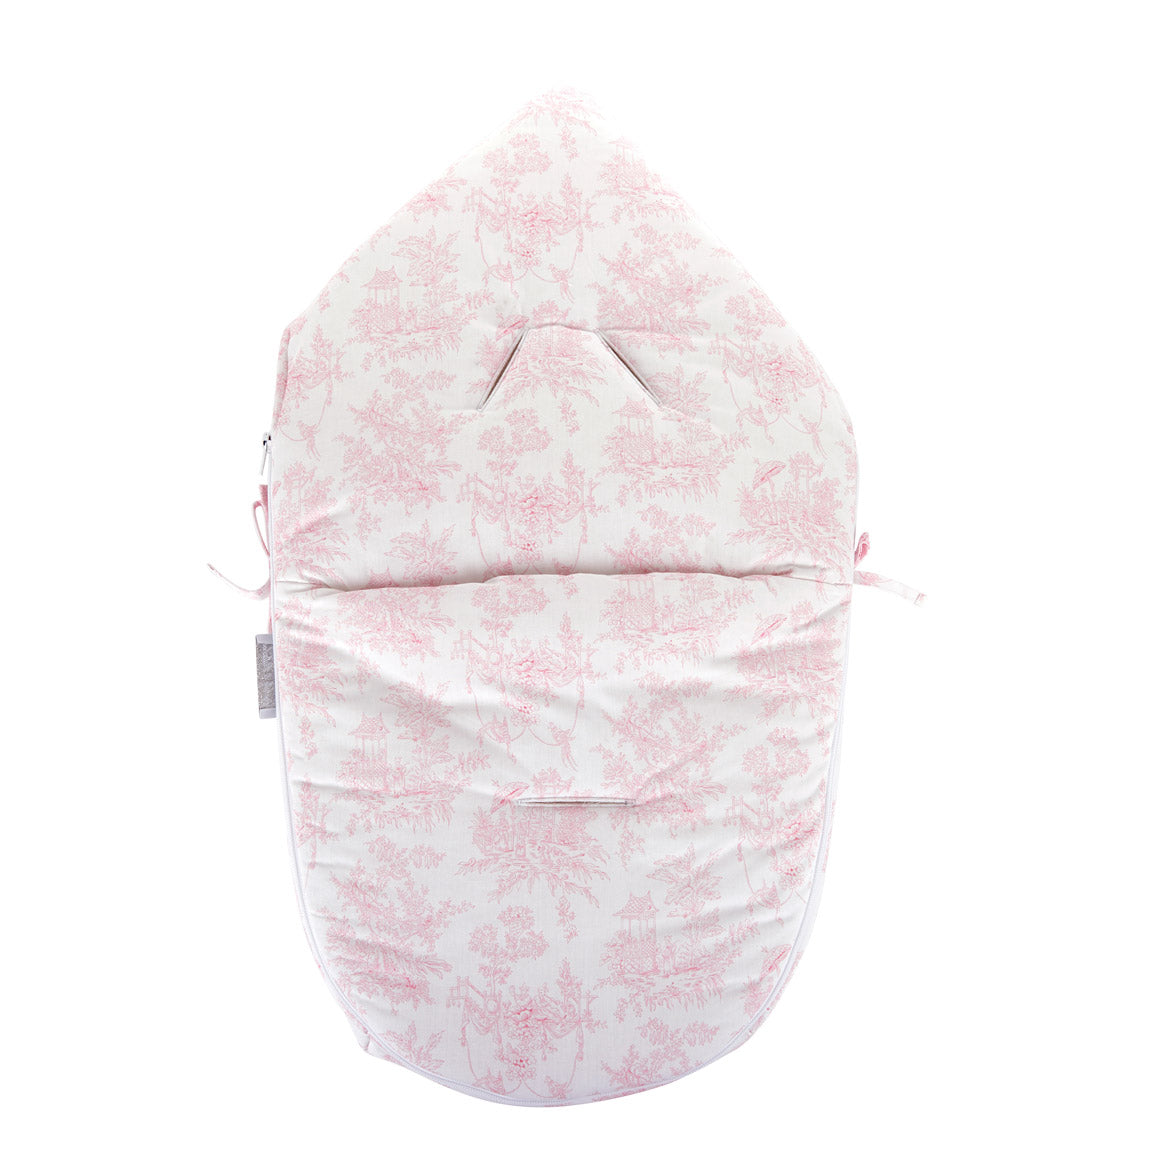 Theophile & Patachou Hooded Sleeping Bag for Car Seat “Pebble+” - Sweet Pink